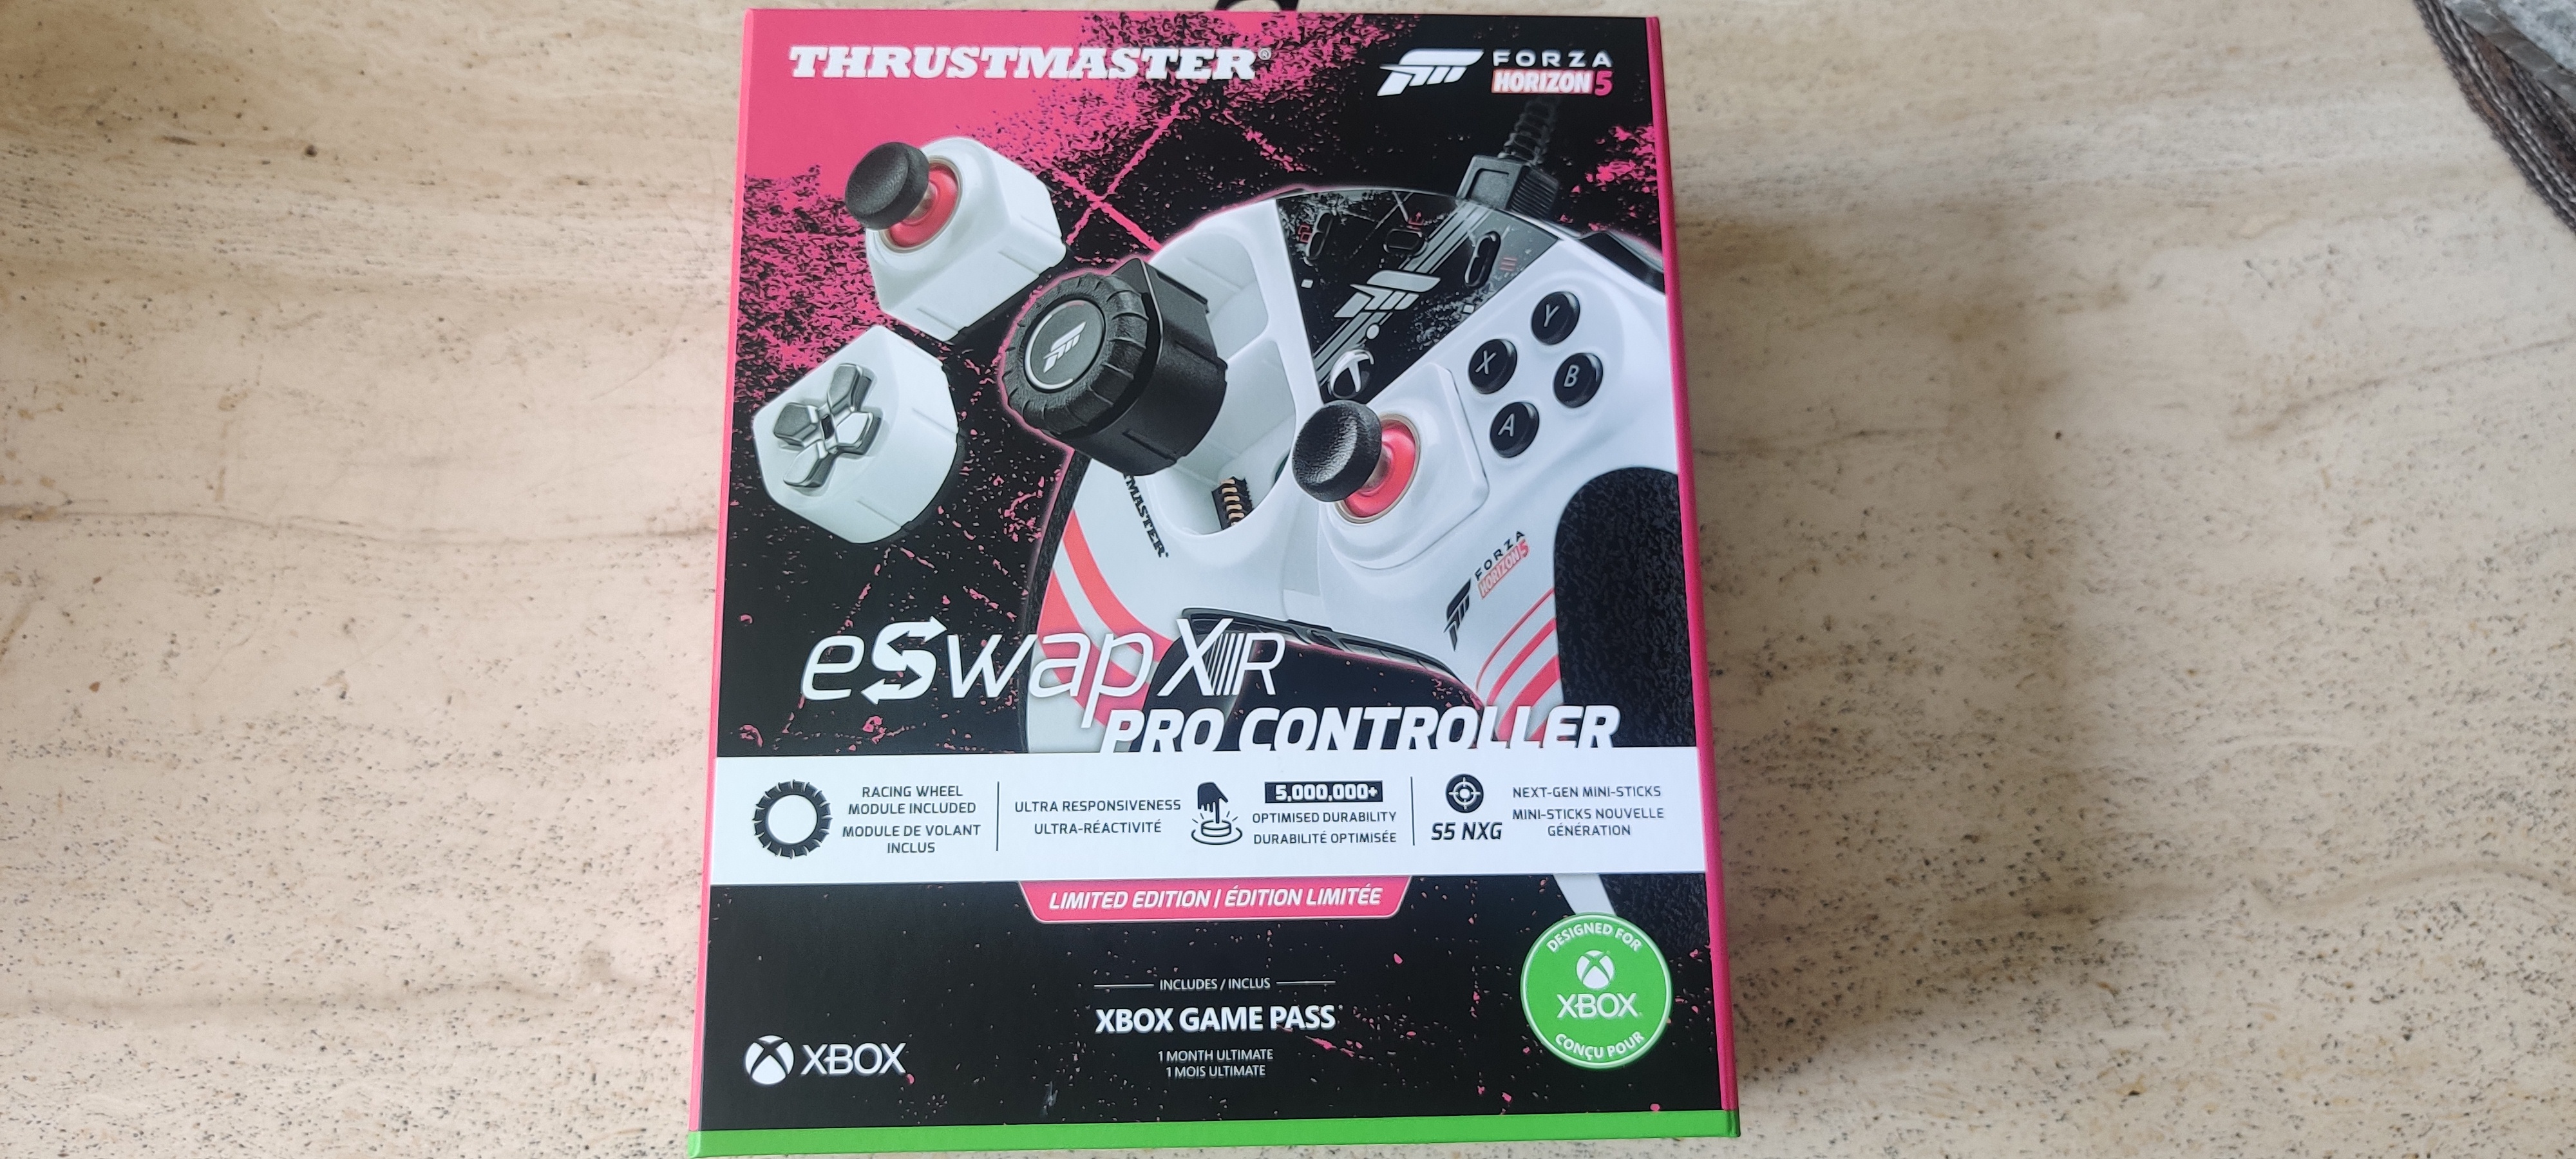 Test Manette Thrustmaster eSwap XR Pro Controller Forza Edition